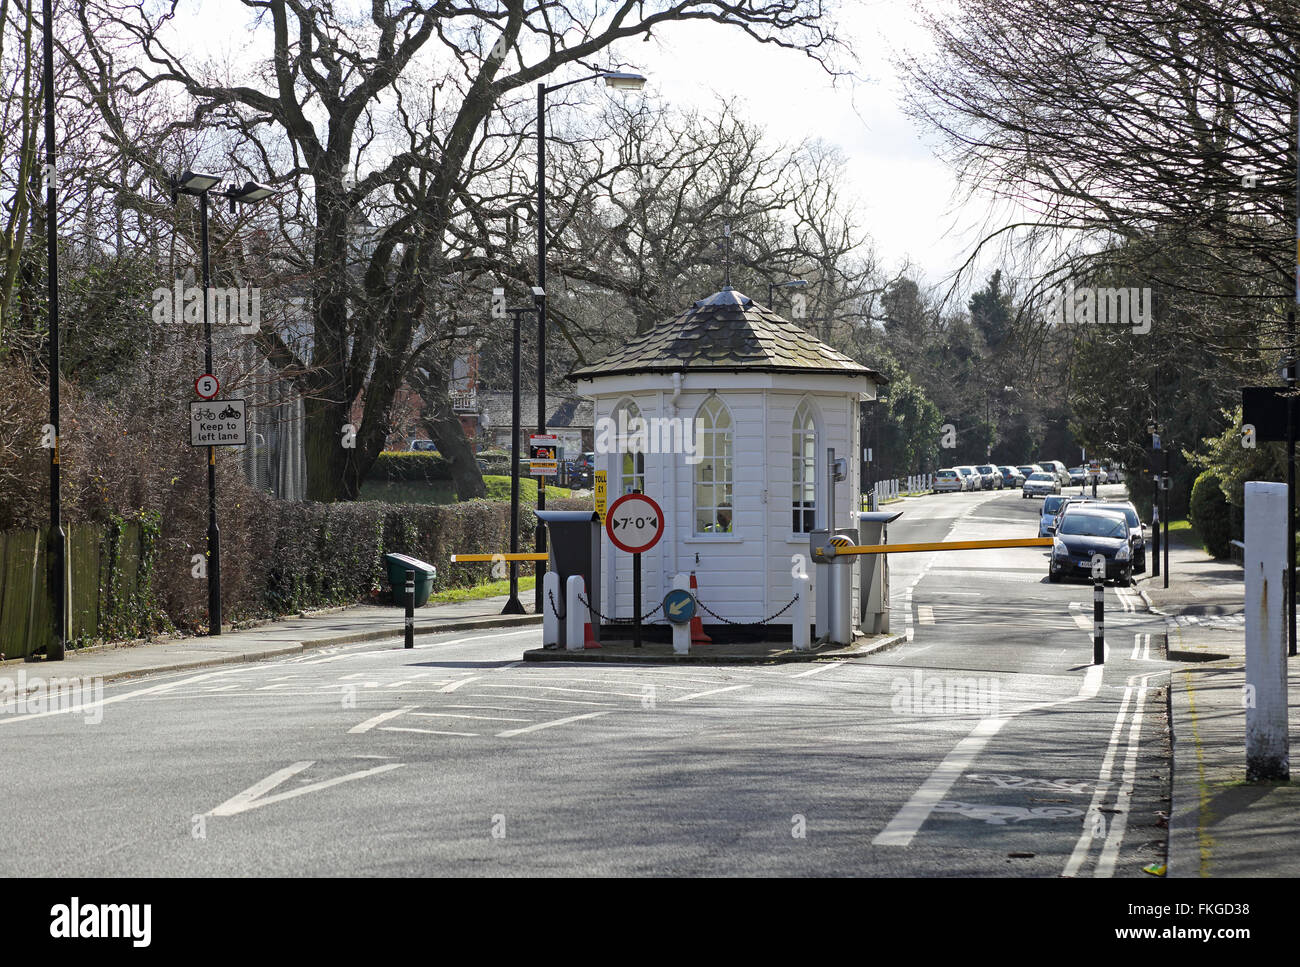 The toll booth on College Road in Dulwich, London. Cars are still required to pay a £1 toll to use the road. Stock Photo